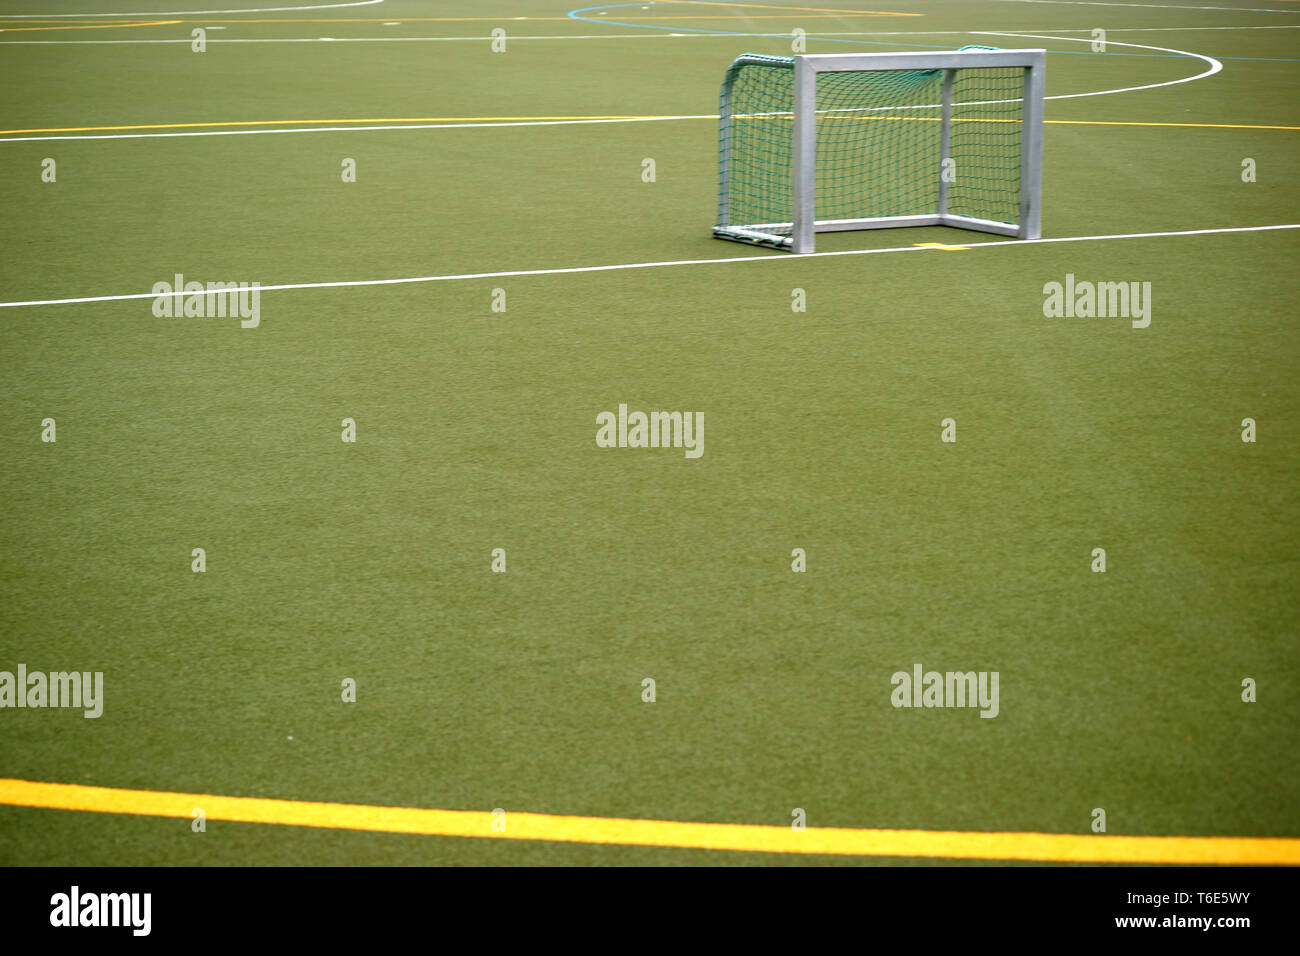 The close-up of an artificial turf field for football matches and field hockey with colored lines and color markings. Stock Photo